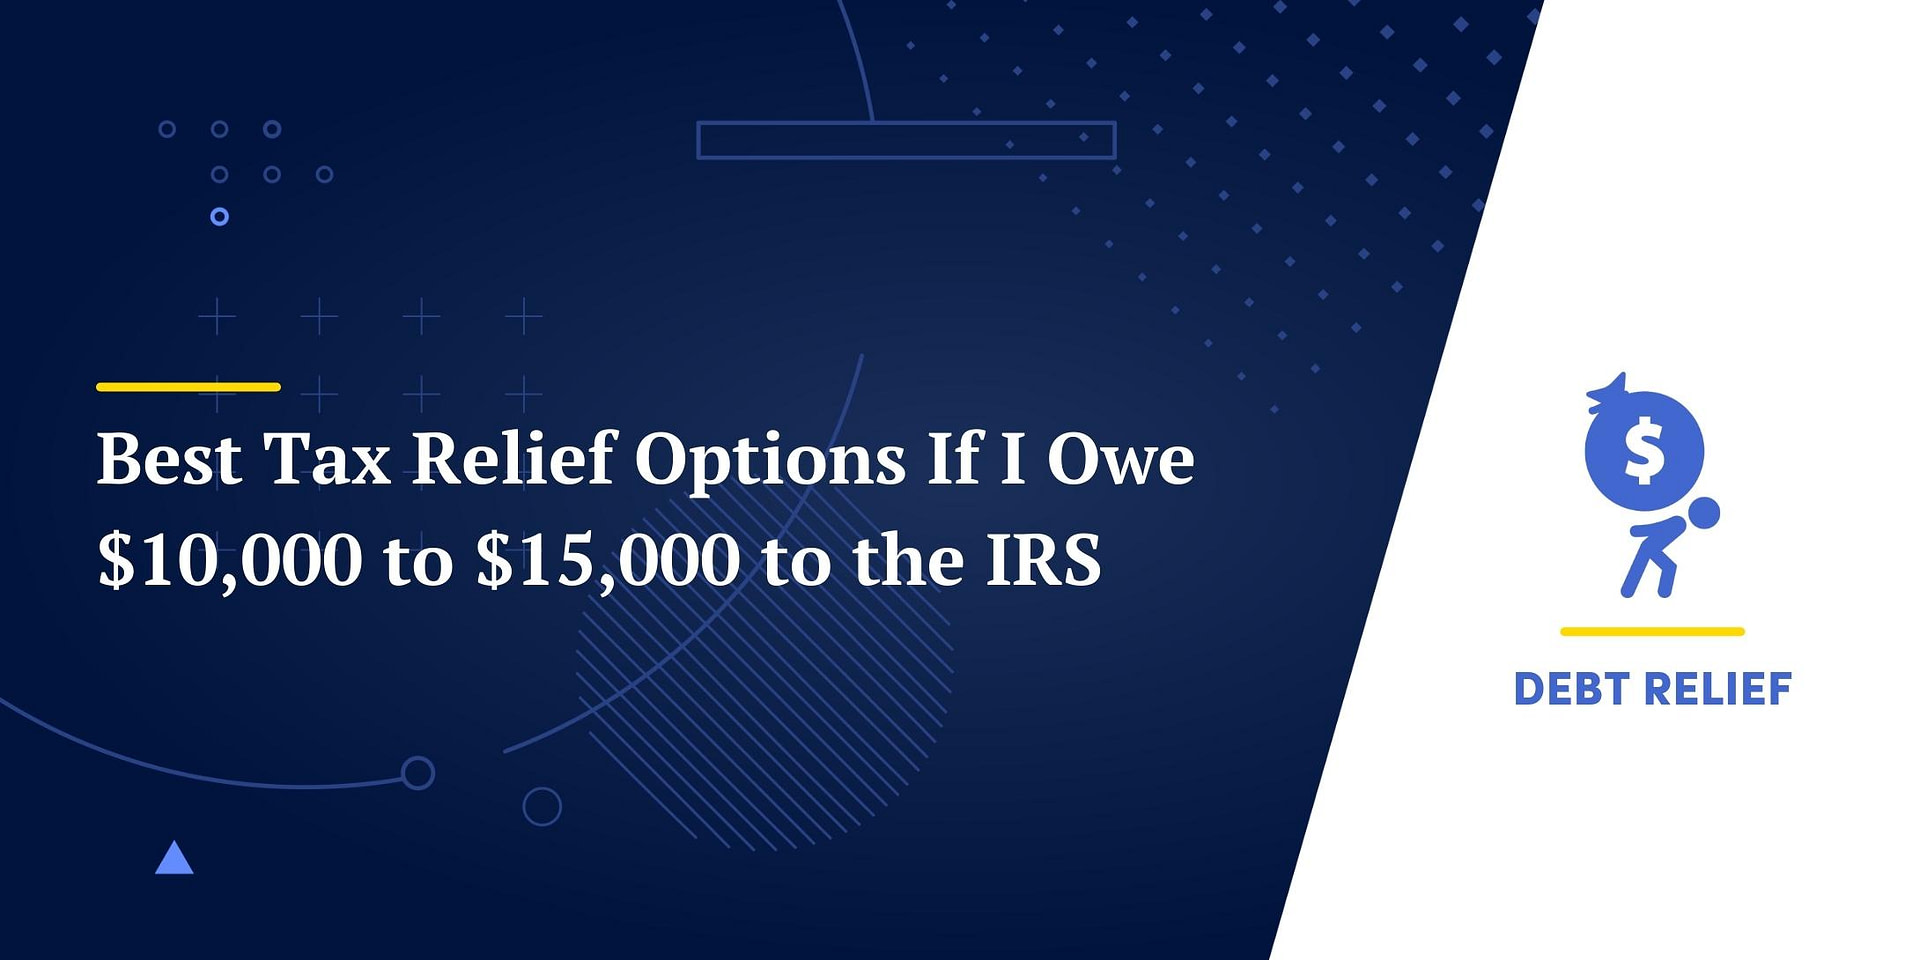 Best Tax Relief Options If I Owe 10,000 to 15,000 to the IRS